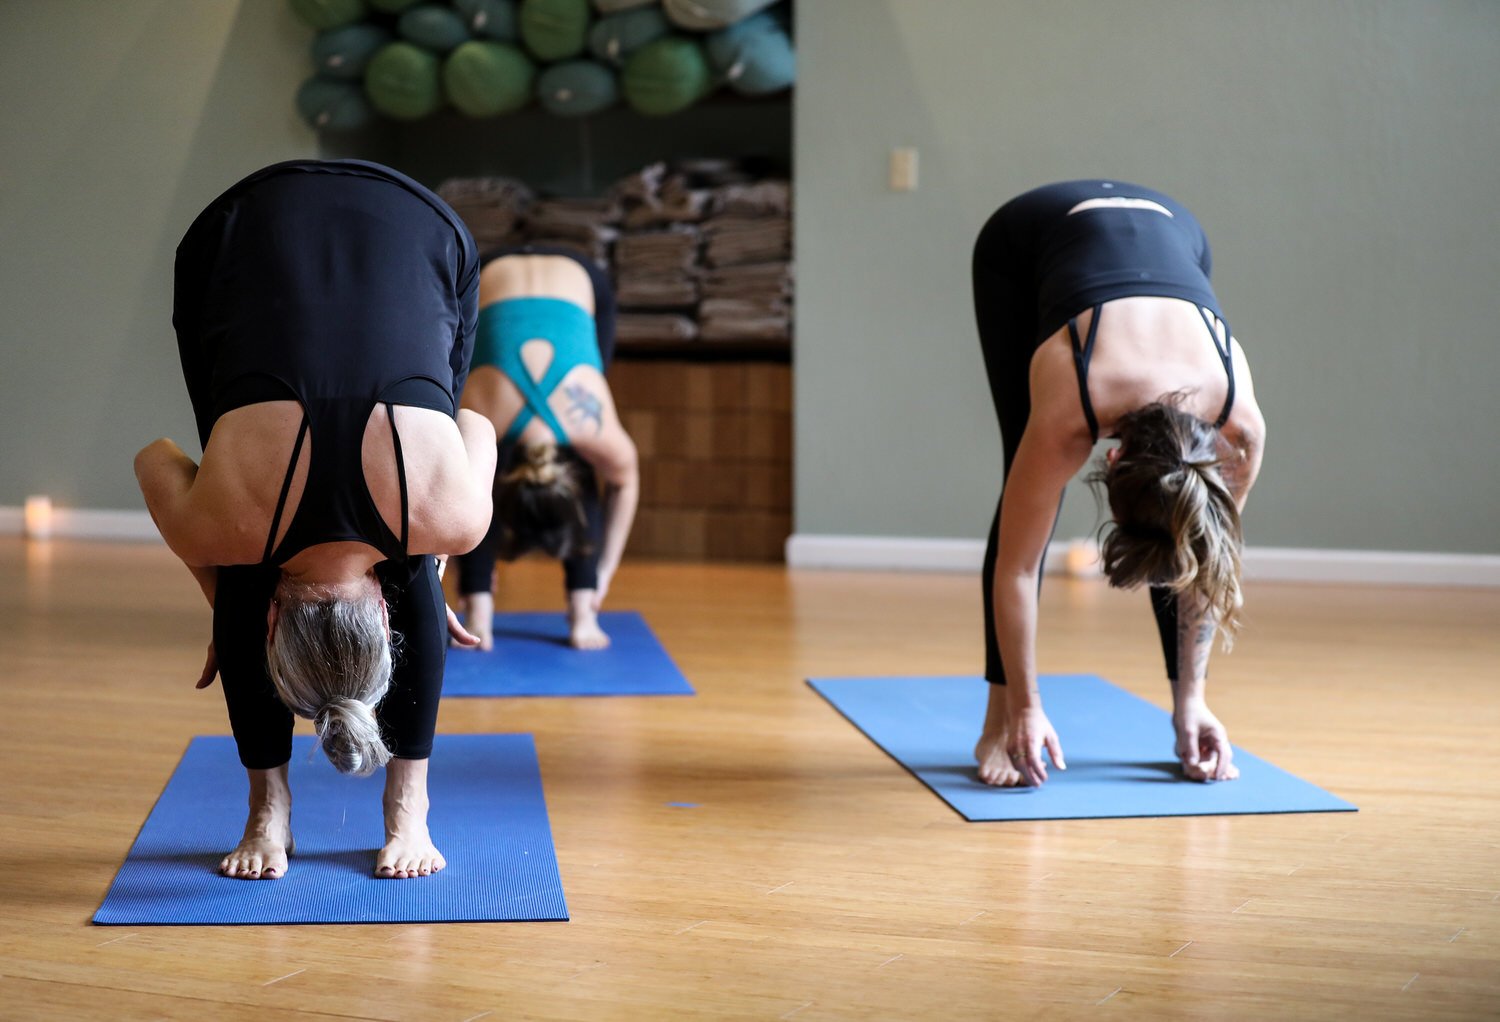 Yoga Classes Schedule - ROOTED HEART YOGA & WELLNESS